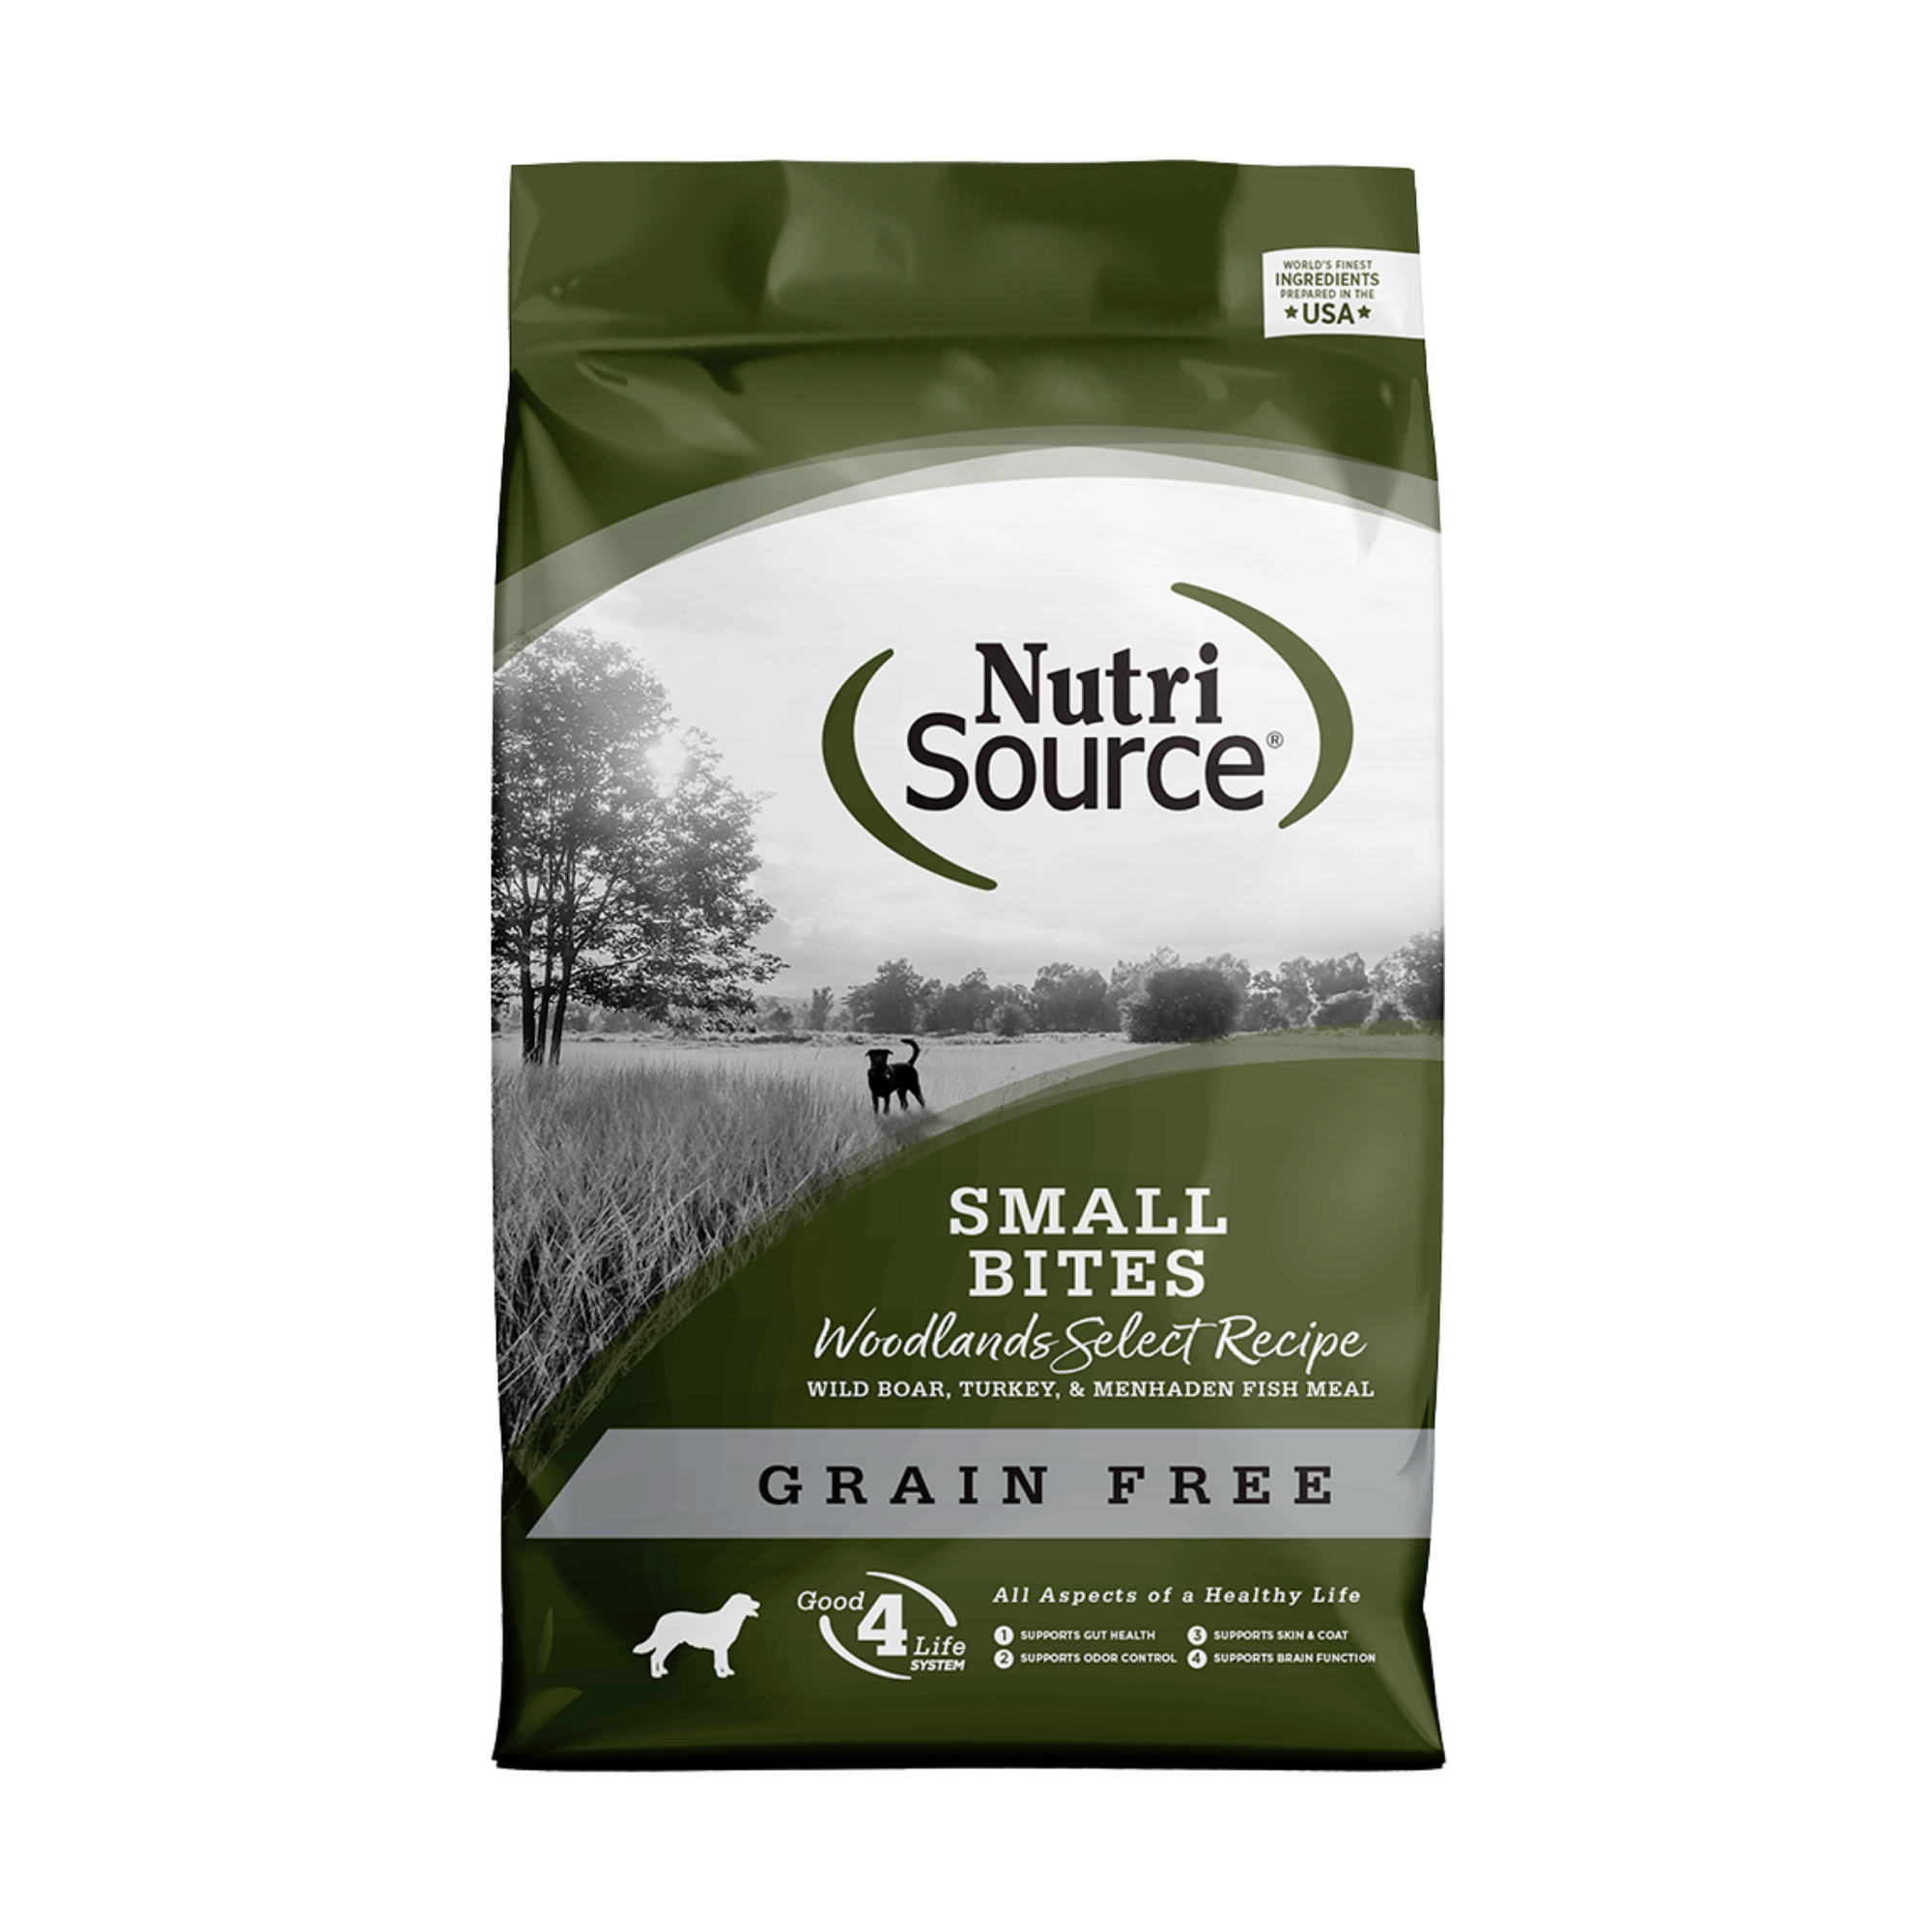 NutriSource Grain-Free Small Bites Woodlands Select Formula Dry Dog Food - Mutts & Co.